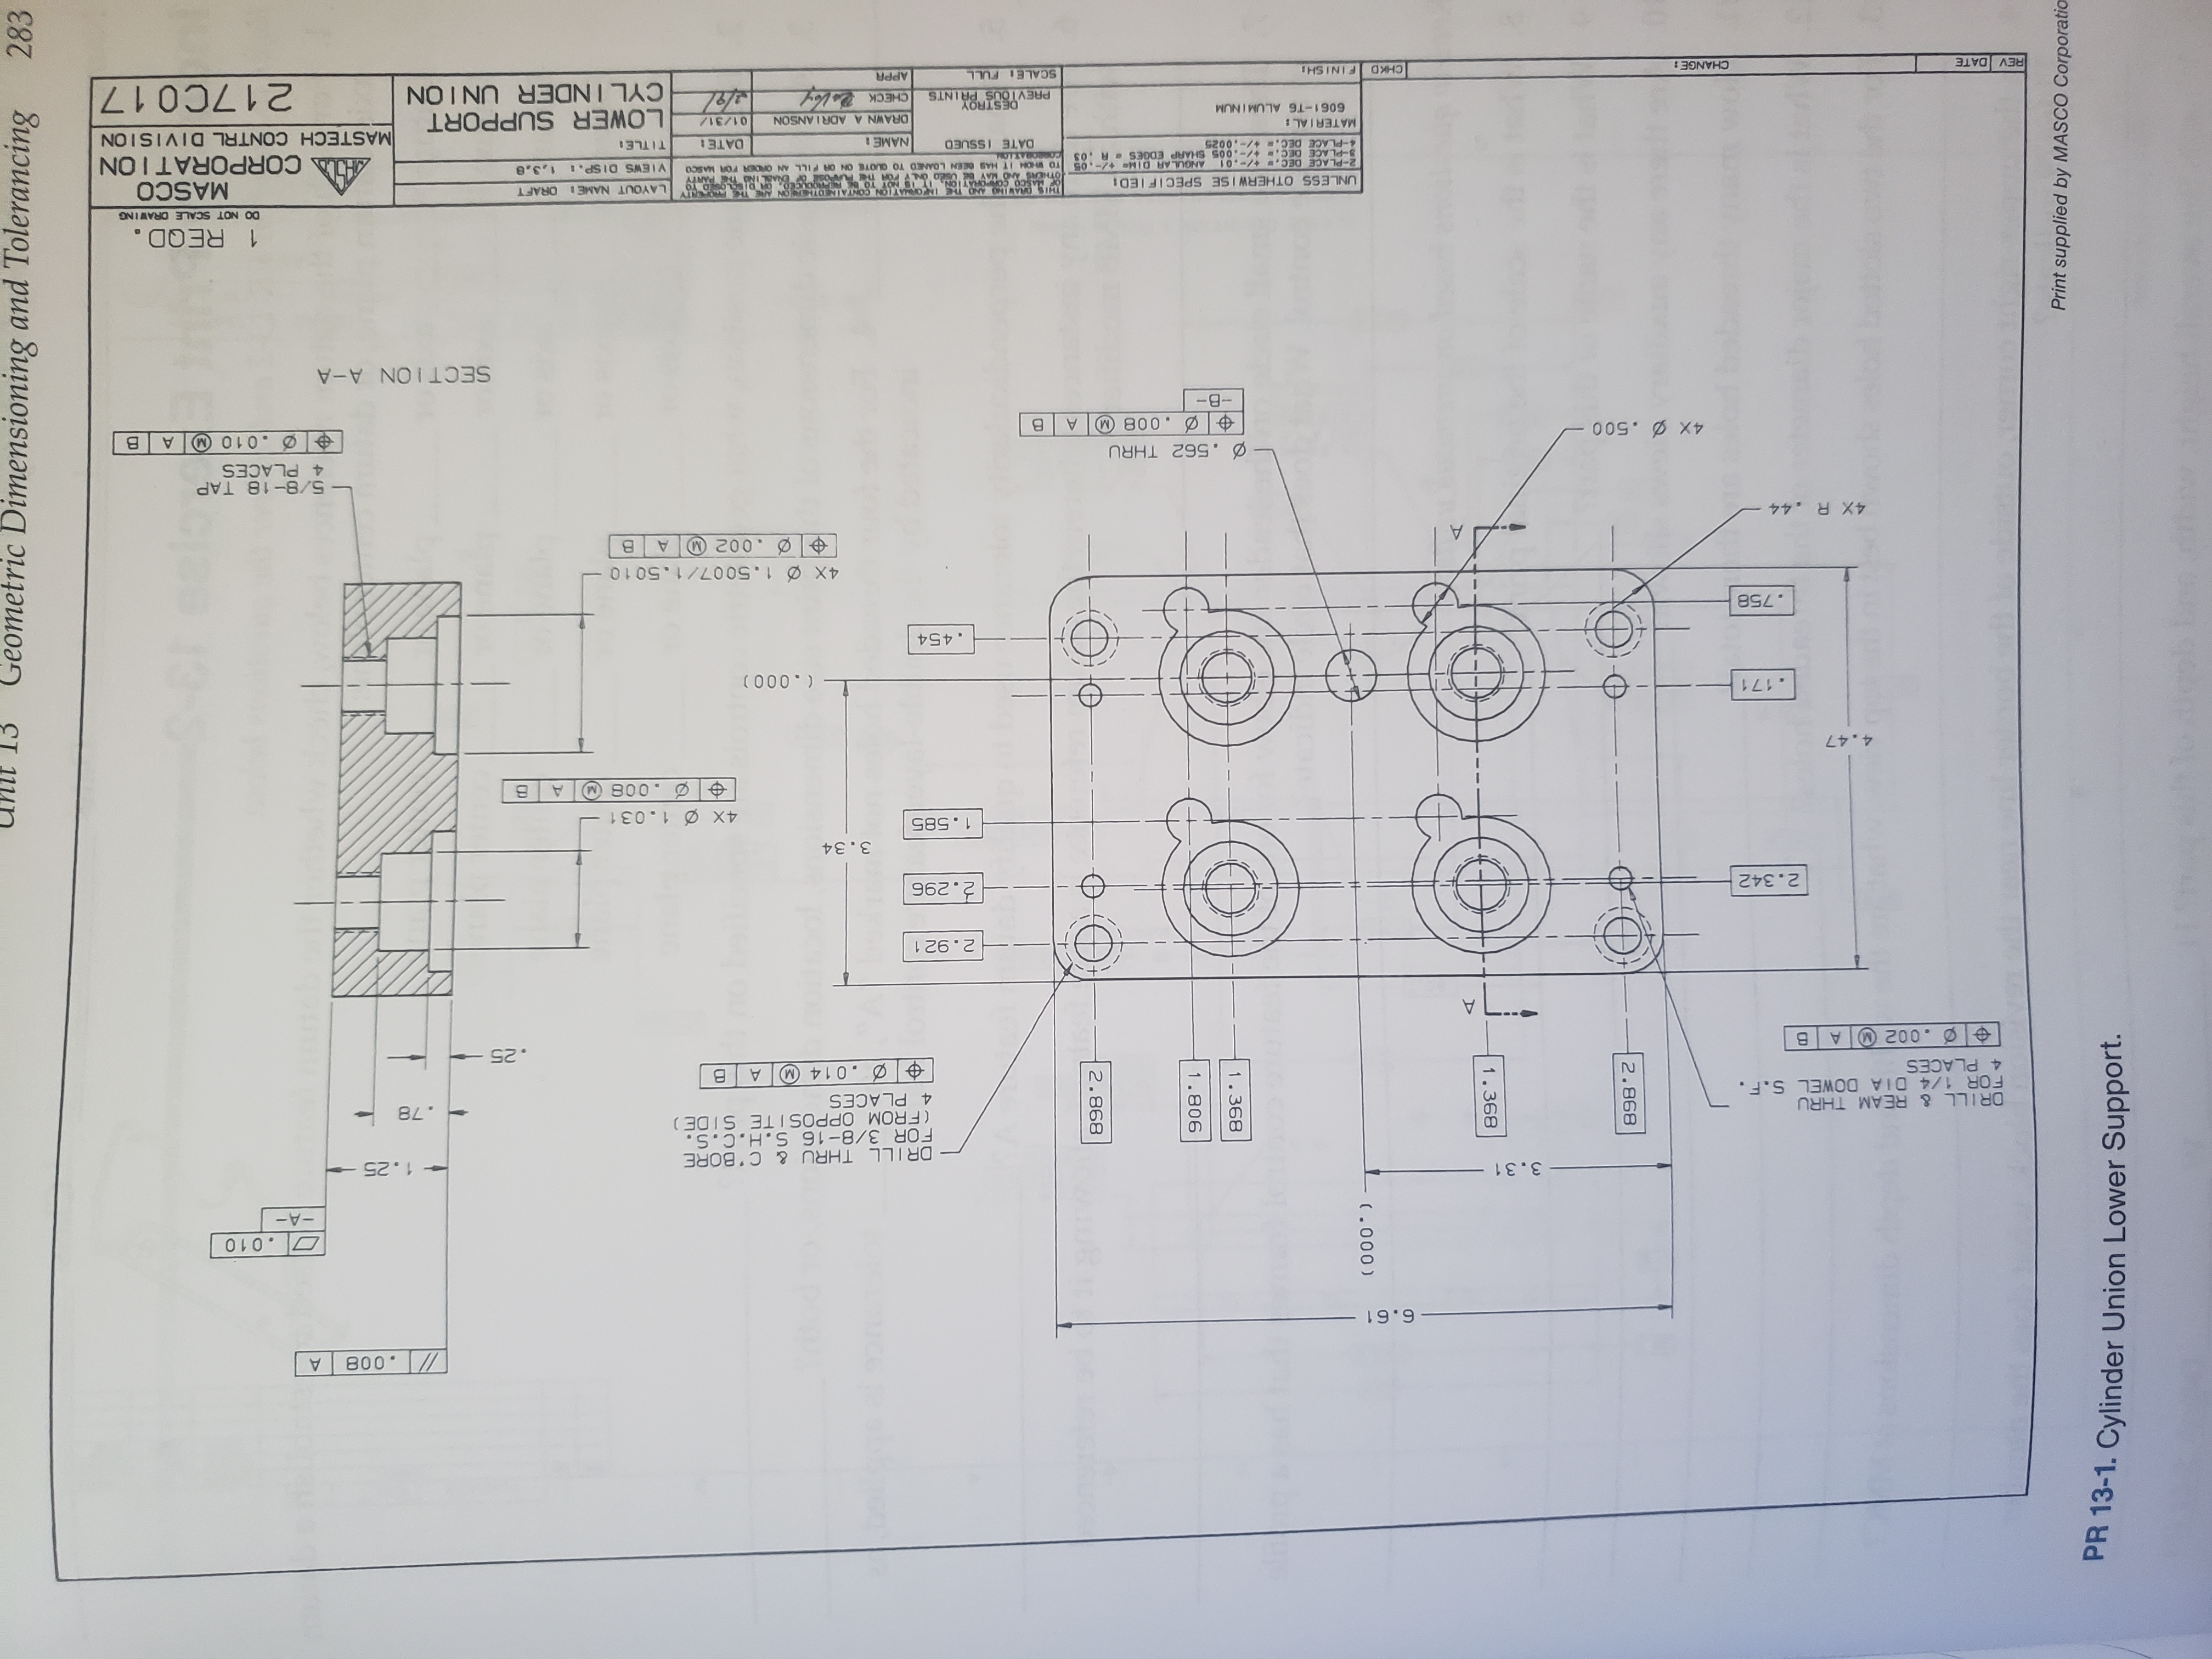 Geometric Dimensioning and Tolerancing
283
898 2
908
(000
893 386
898 2
Print supplied by MASCO Corporatio
PR 13-1. Cylinder Union Lower Support.
800
6.61
O.010
-A-
3.31
1.25
DRILL THRU & C'BORE
FOR 3/8-16 S.H.C.S.
(FROM OPPOSITE SIDE)
4 PLACES
DRILL & REAM THRU
FOR 1/4 DIA DOWEL S.F.
4 PLACES
.78
.014 M A
.002 A B
.25
L..
2.921
2.342
96 2
3.34
1.585
4X 1.031
800
4.47
.171
( 000 )
.454
.758
4X 1.5007/1.501 o
.002 A
4X R.44
- 5/8-18 TAP
4 PLACES
.562 THRU
Ø.010 A
B
0050
-B-
800
SECTION A-A
1 REQD.
DO NOT SCALE ORAWING
THIS DRAVING AND THE INFORMAYION CONTAINEDTHEREON ARE THE FROPERTY
OTHERS AND MAY 8SED ONLY POR TE FURPOSE OF ENABL INO THE PARTY
TO WHOM IT HAS BEEN LOANED TO QUOTE ON OR PILL AN OR0ER FOR MASCO
UNLESS OTHERWISE SPECIFIED
LAYOUT NAME ORAFT
MASCO
A CORPORATION
ANGUL AR DIM- +/-.05
2-PLACE DEC. -01
8-PLACE DEC. -.005 SHARP EDGES A .03
VIEWS DISP.
DATE ISSUED
NAME:
DATE:
TITLE
9200-/+ 30 d-
MATERIAL:
MASTECH CONTRL DIVISION
LOWER SUPPORT
CYLINDER UNION
ORAWN A ADRIANSON
01/31/
6061-T6 ALUMINUM
DESTROY
PREVIOUS PRINTS
217C017
CHECK
REV DATE
CHANGE:
CHKD
FINISH
SCALE FULL
APPR
